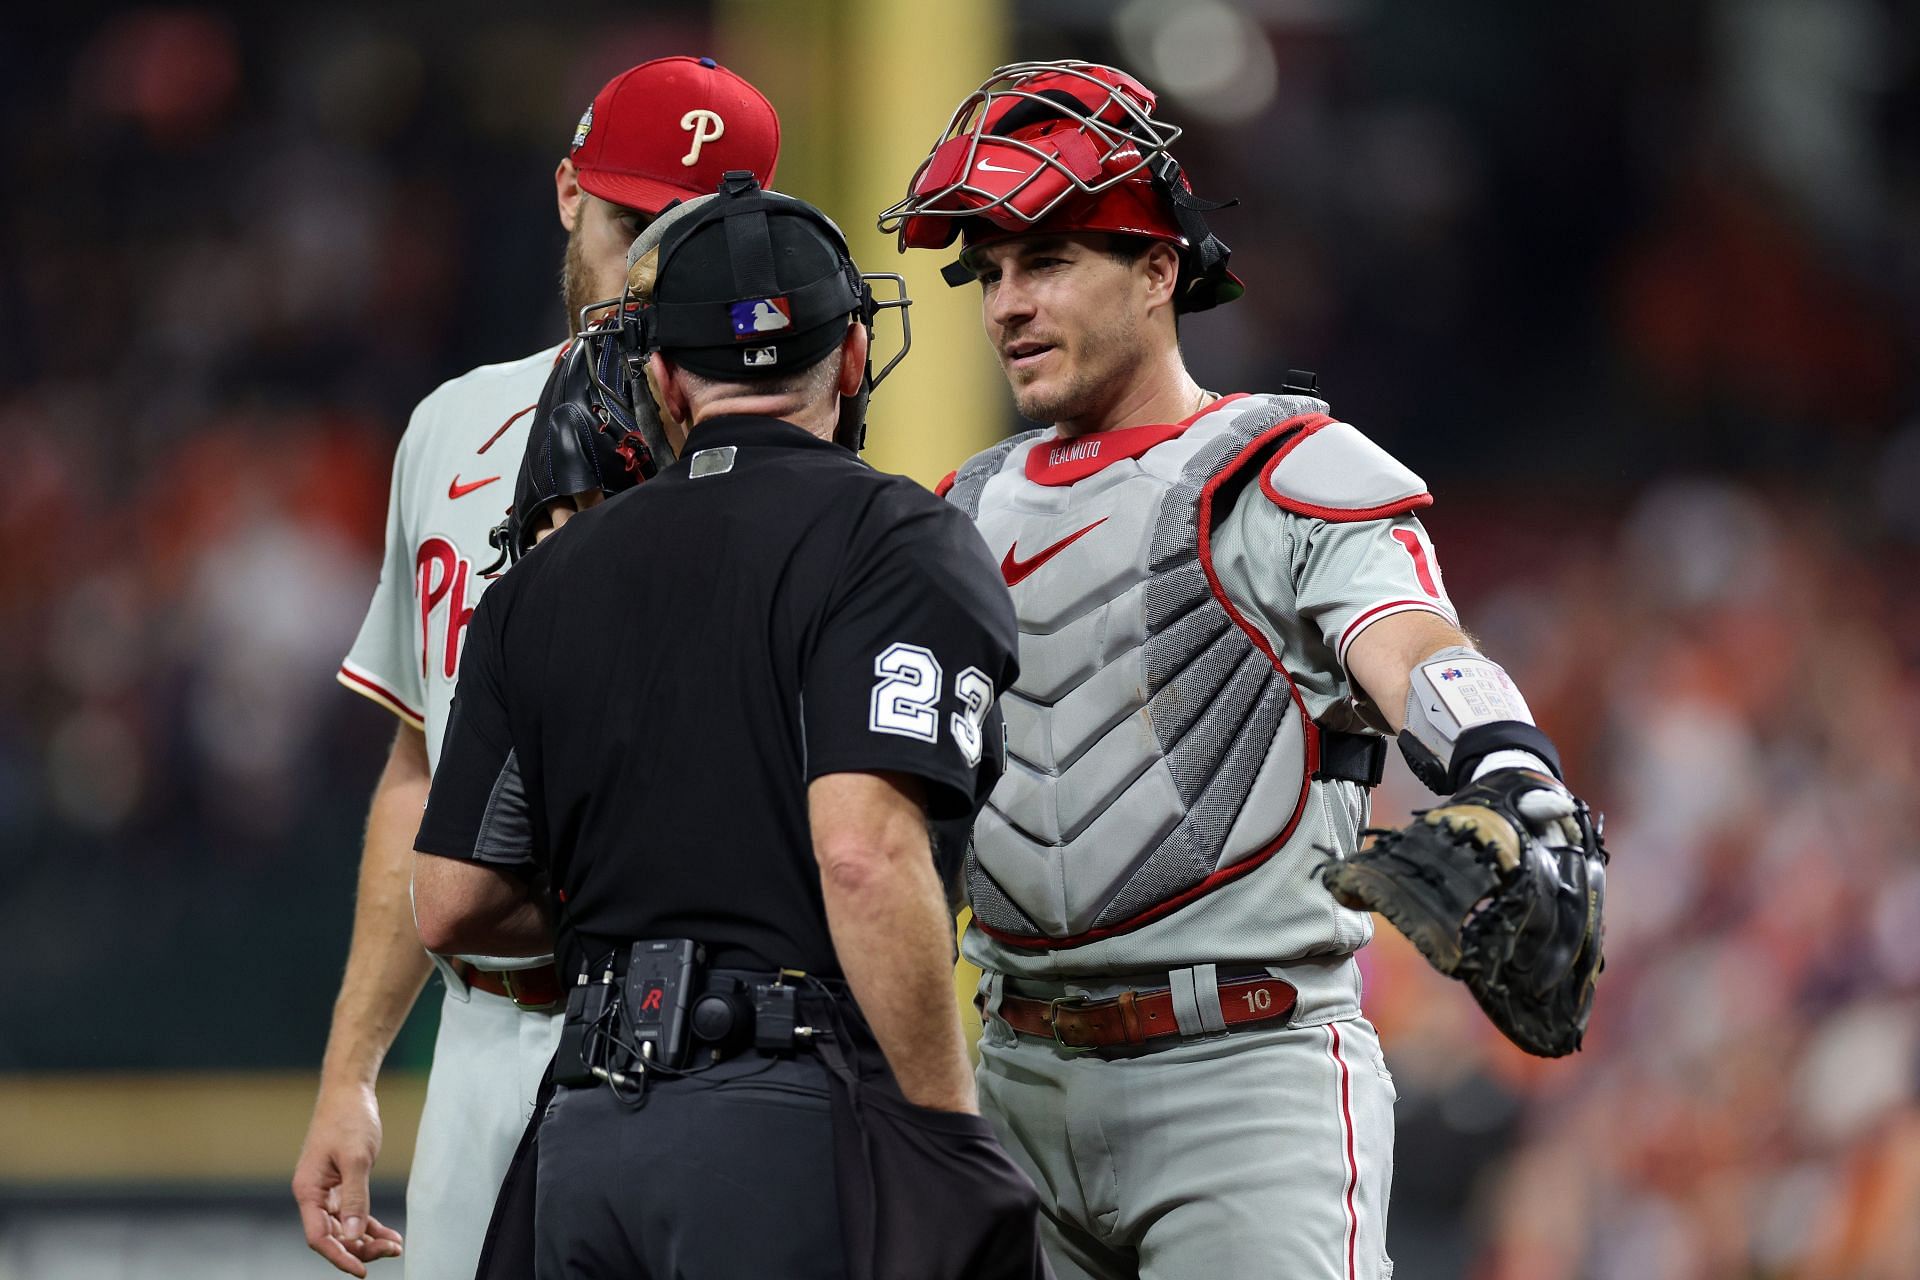 Umpire ejects Realmuto after bizarre game ball exchange